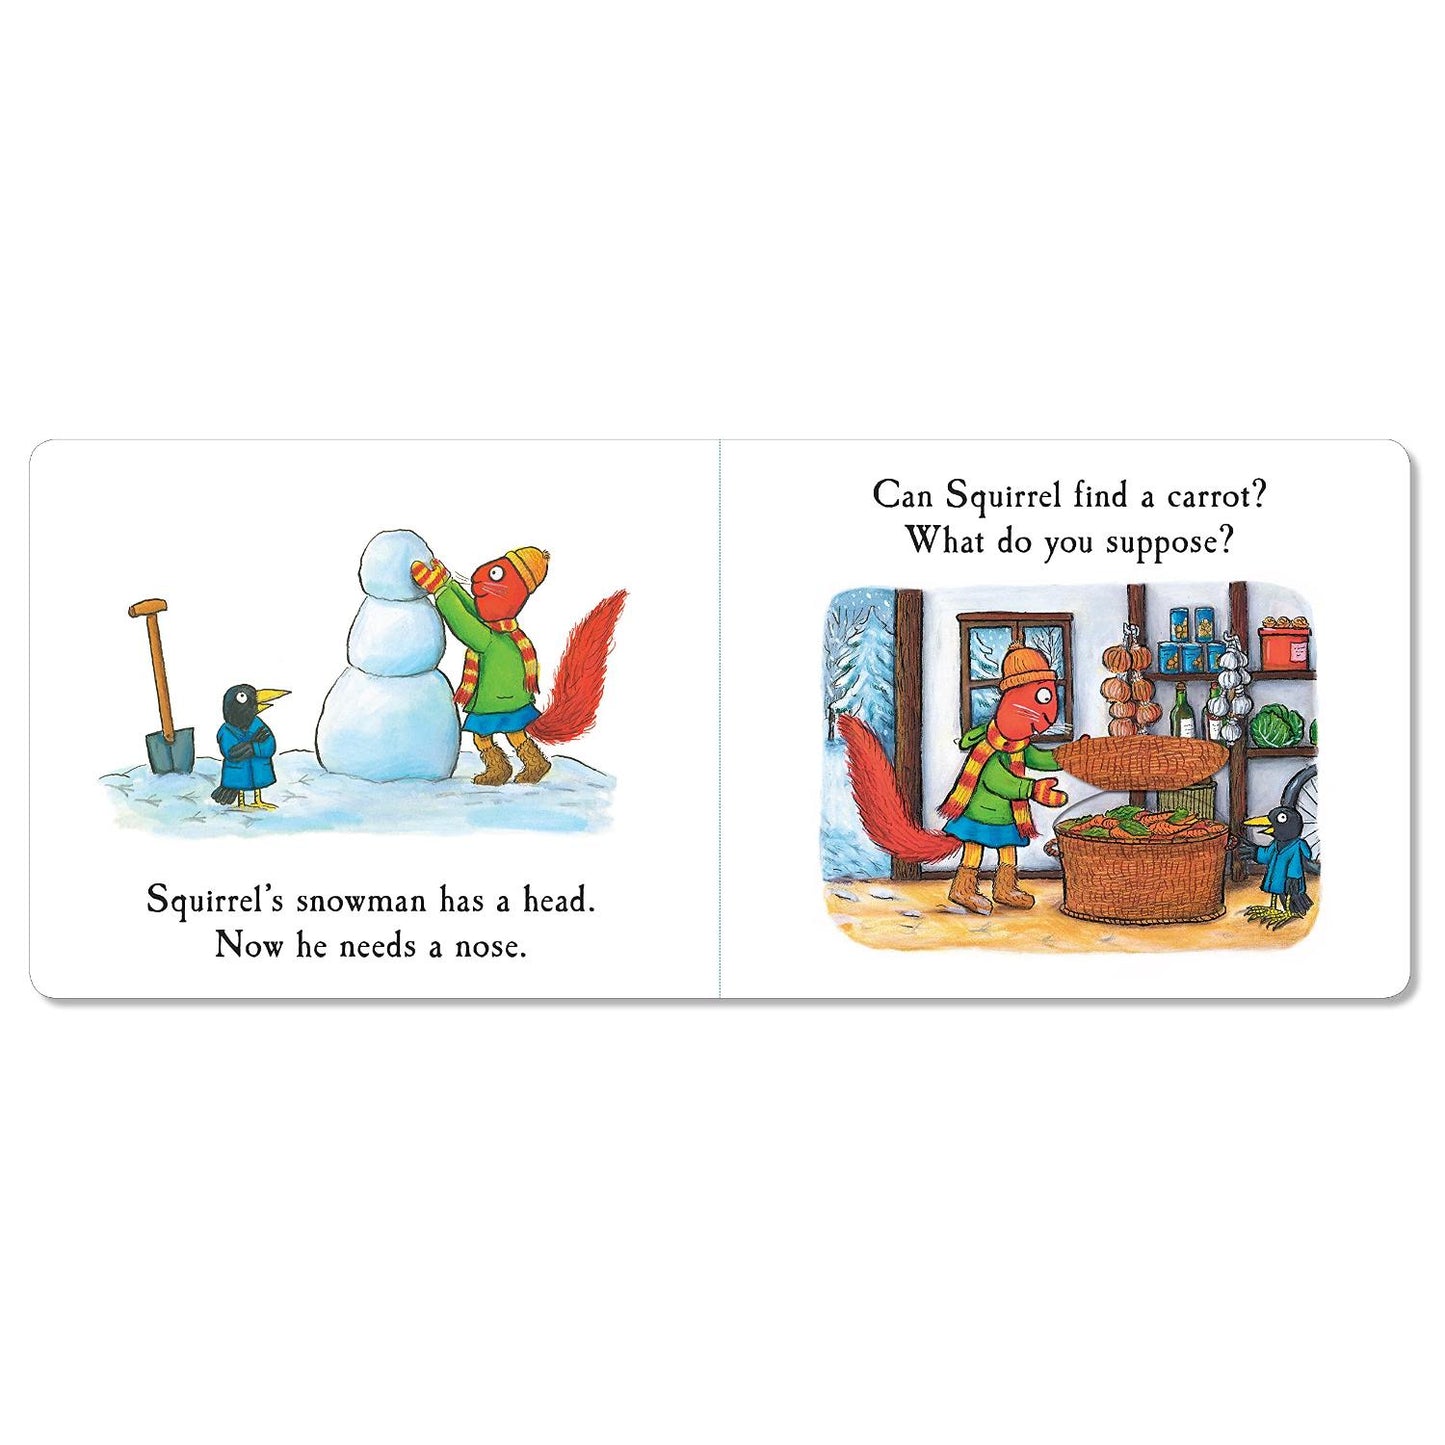 Squirrel's Snowman: A Tales from Acorn Wood story | Interactive Children’s Board Book